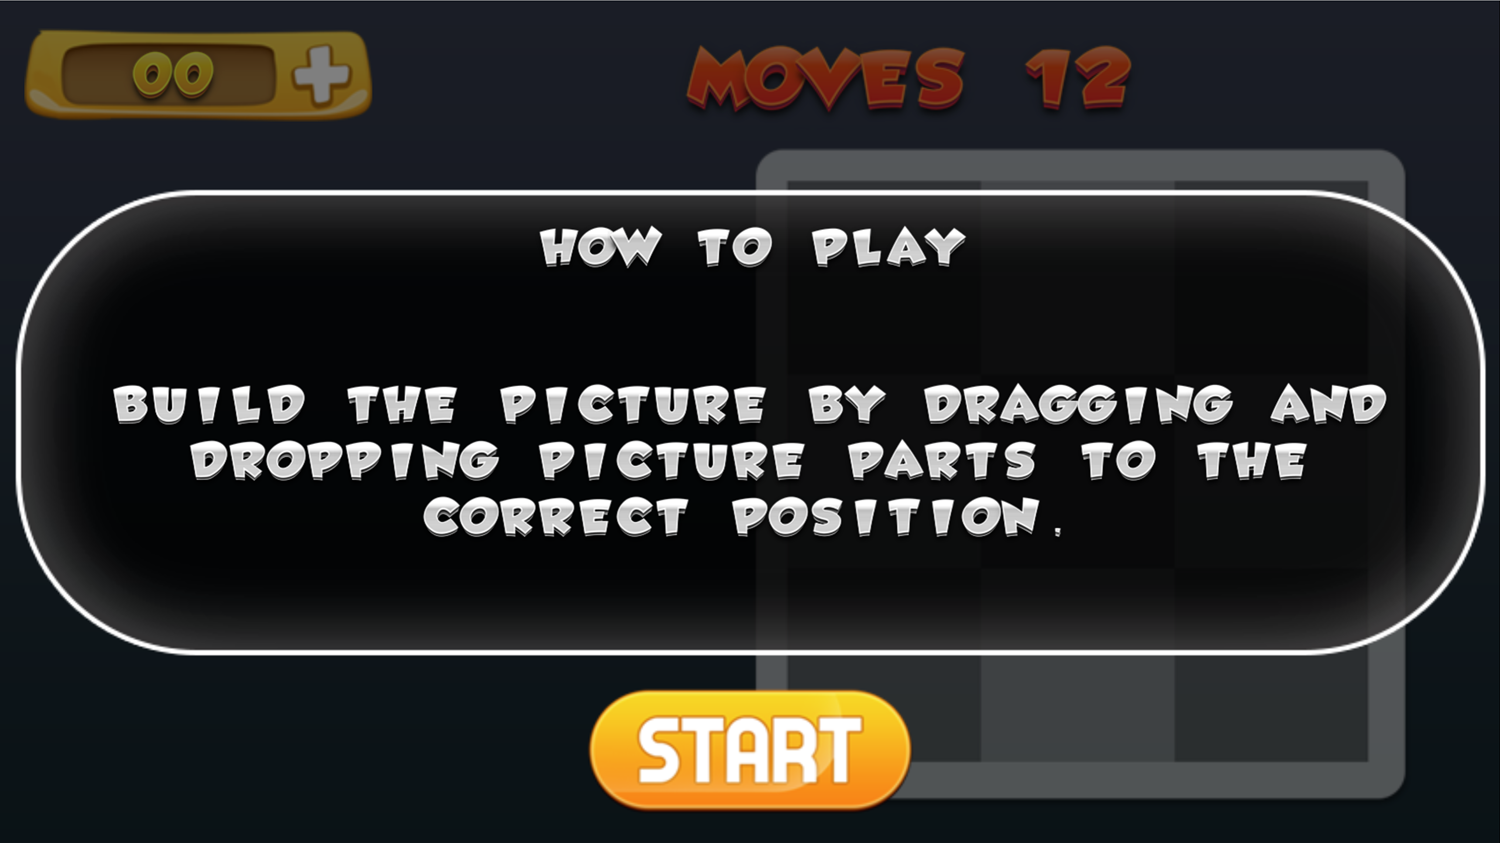 Build The Pictures Game Welcome Screen Screenshot.